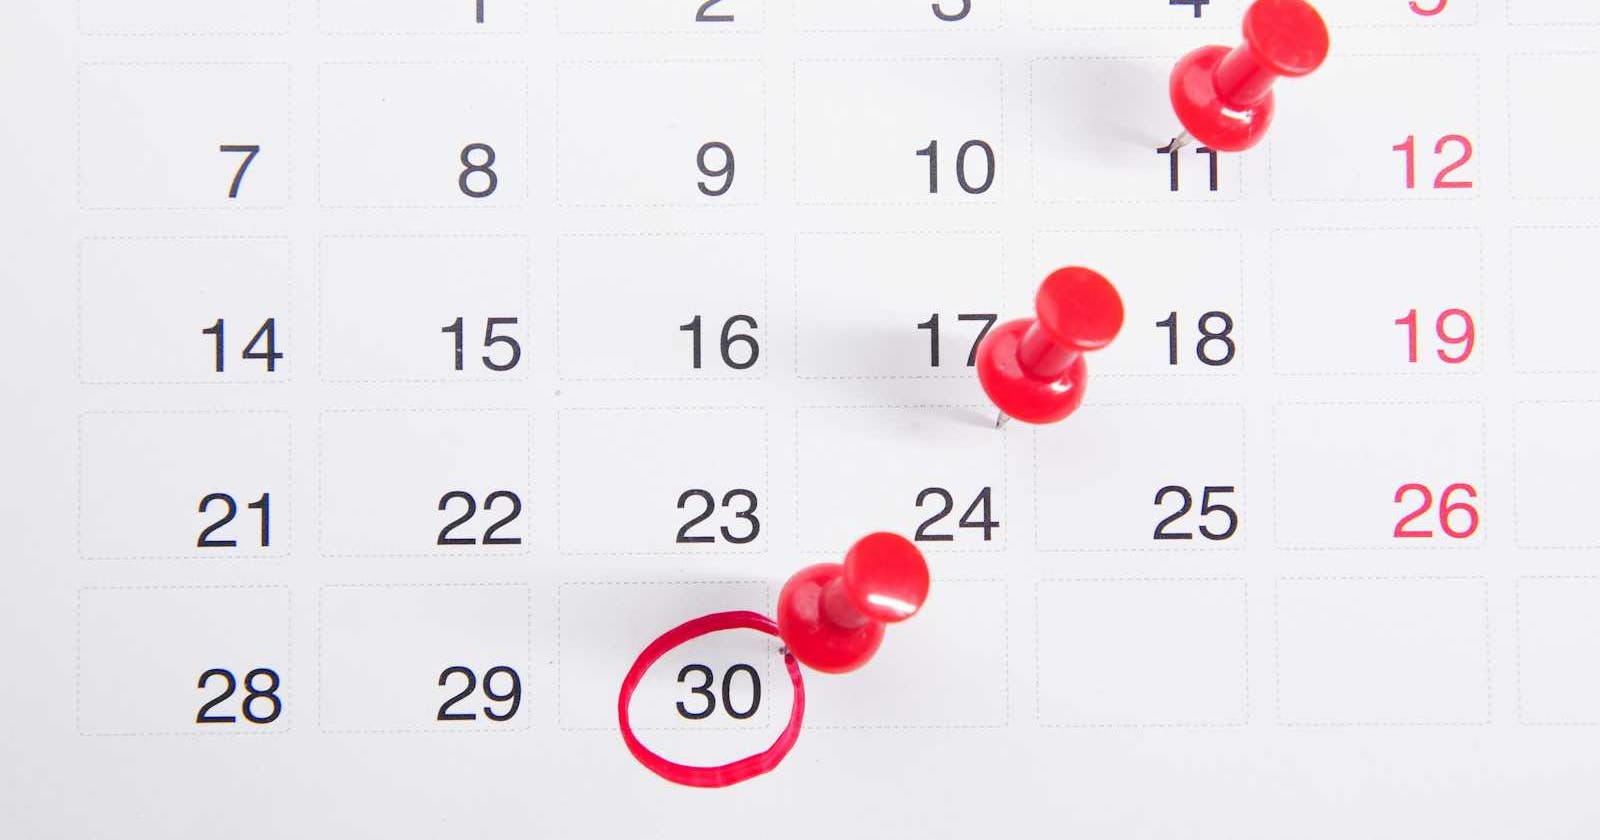 Oracle APEX: Calendar Options You Might Not Know About